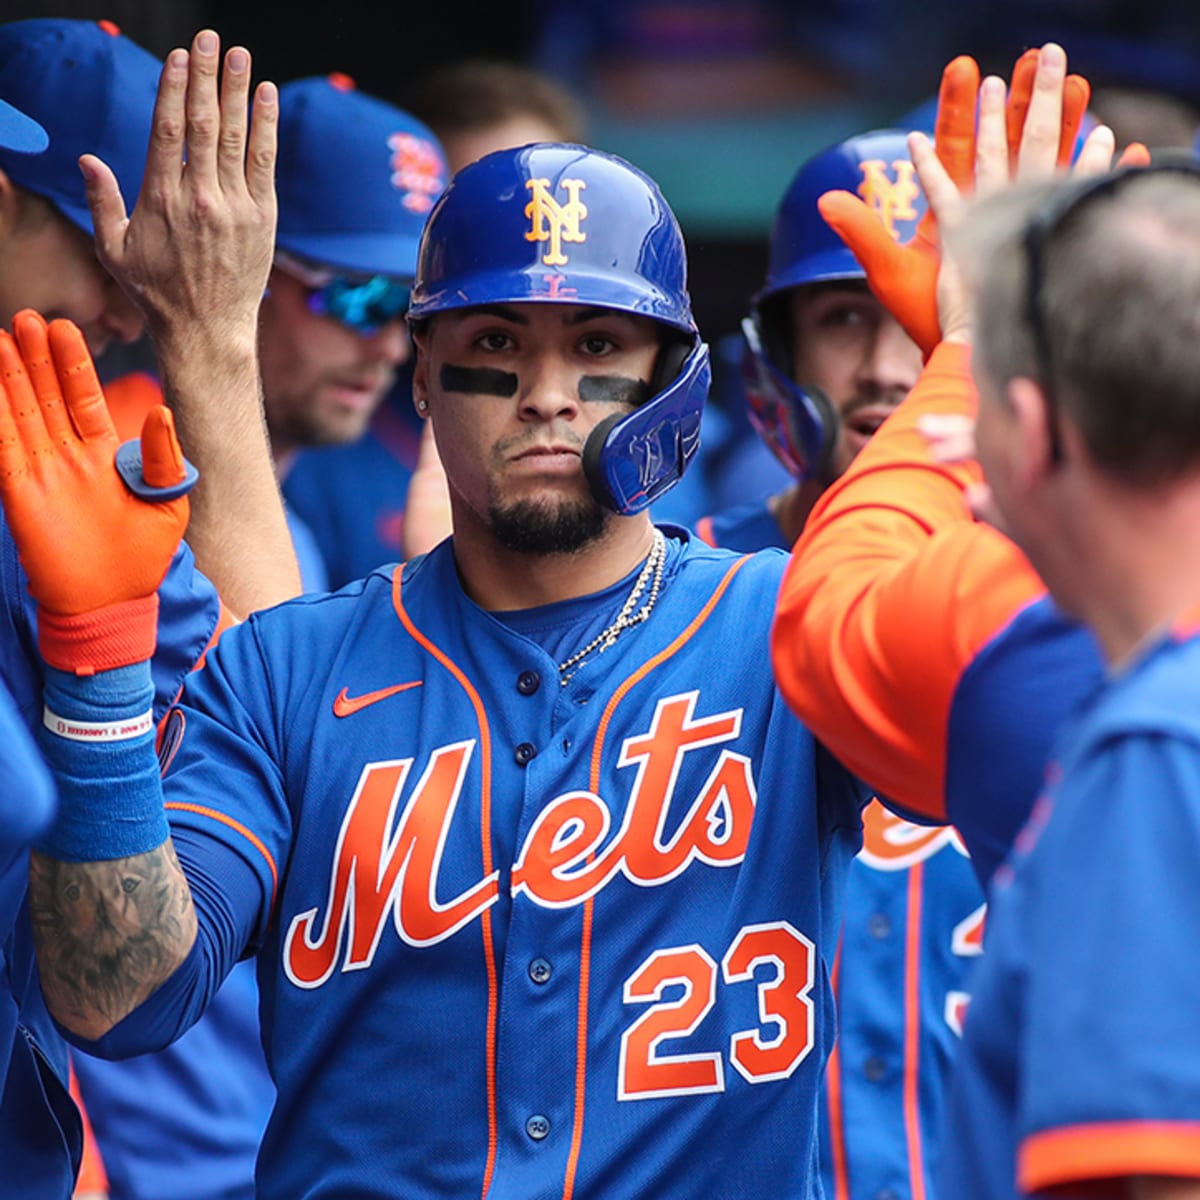 Mets president: Thumbs-down gesture by Javy Báez, others 'totally